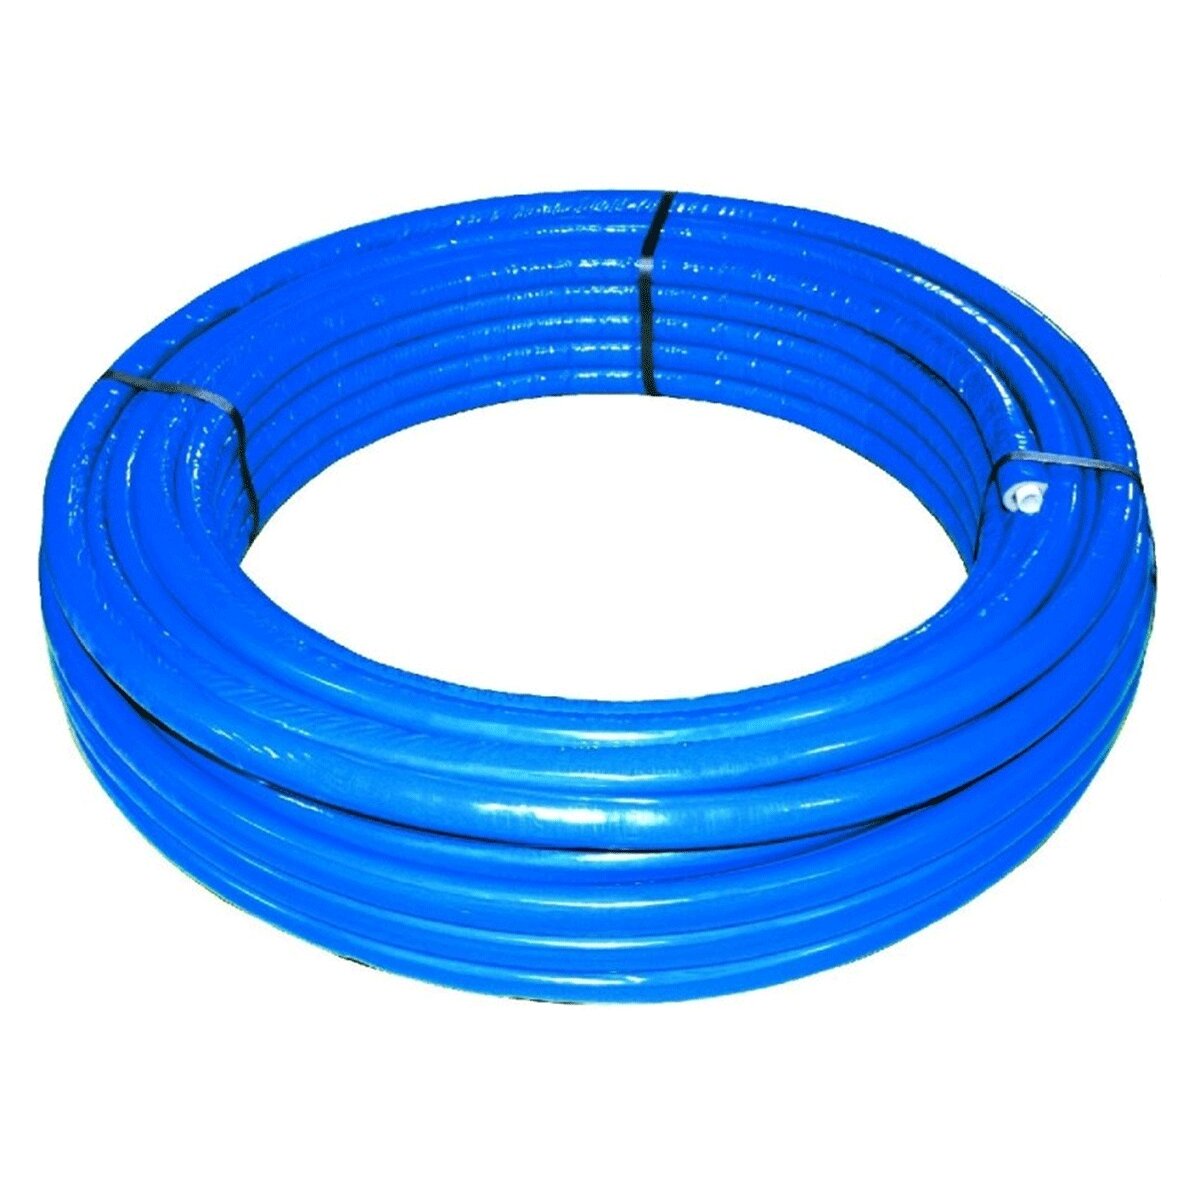 Valsir Mixal multilayer pipe Ø20X2 mm with 10 mm insulating sheath Blue